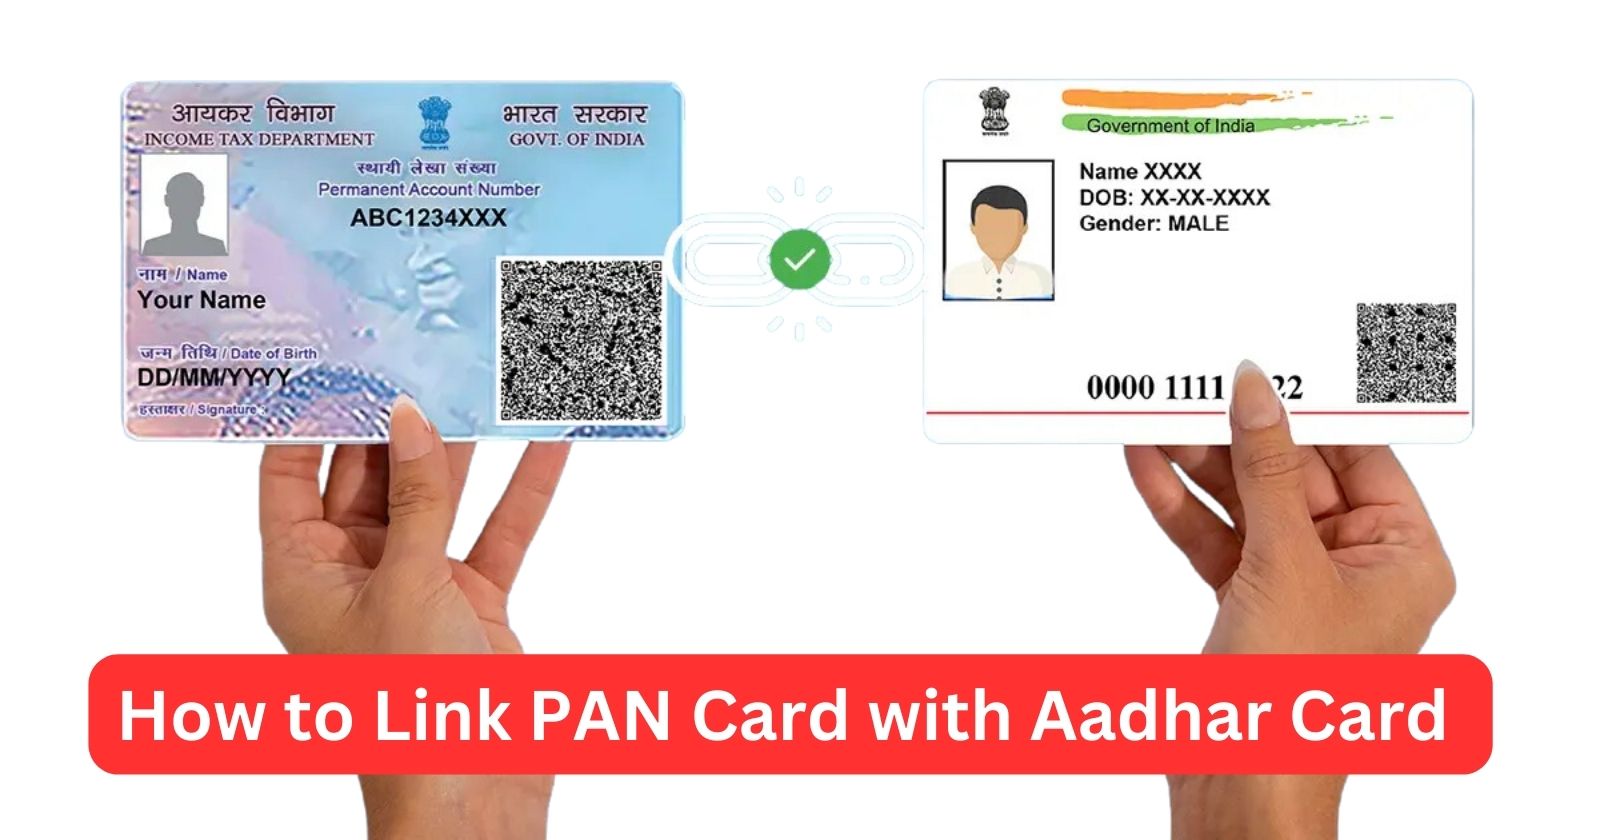 How to Link PAN Card with Aadhar Card